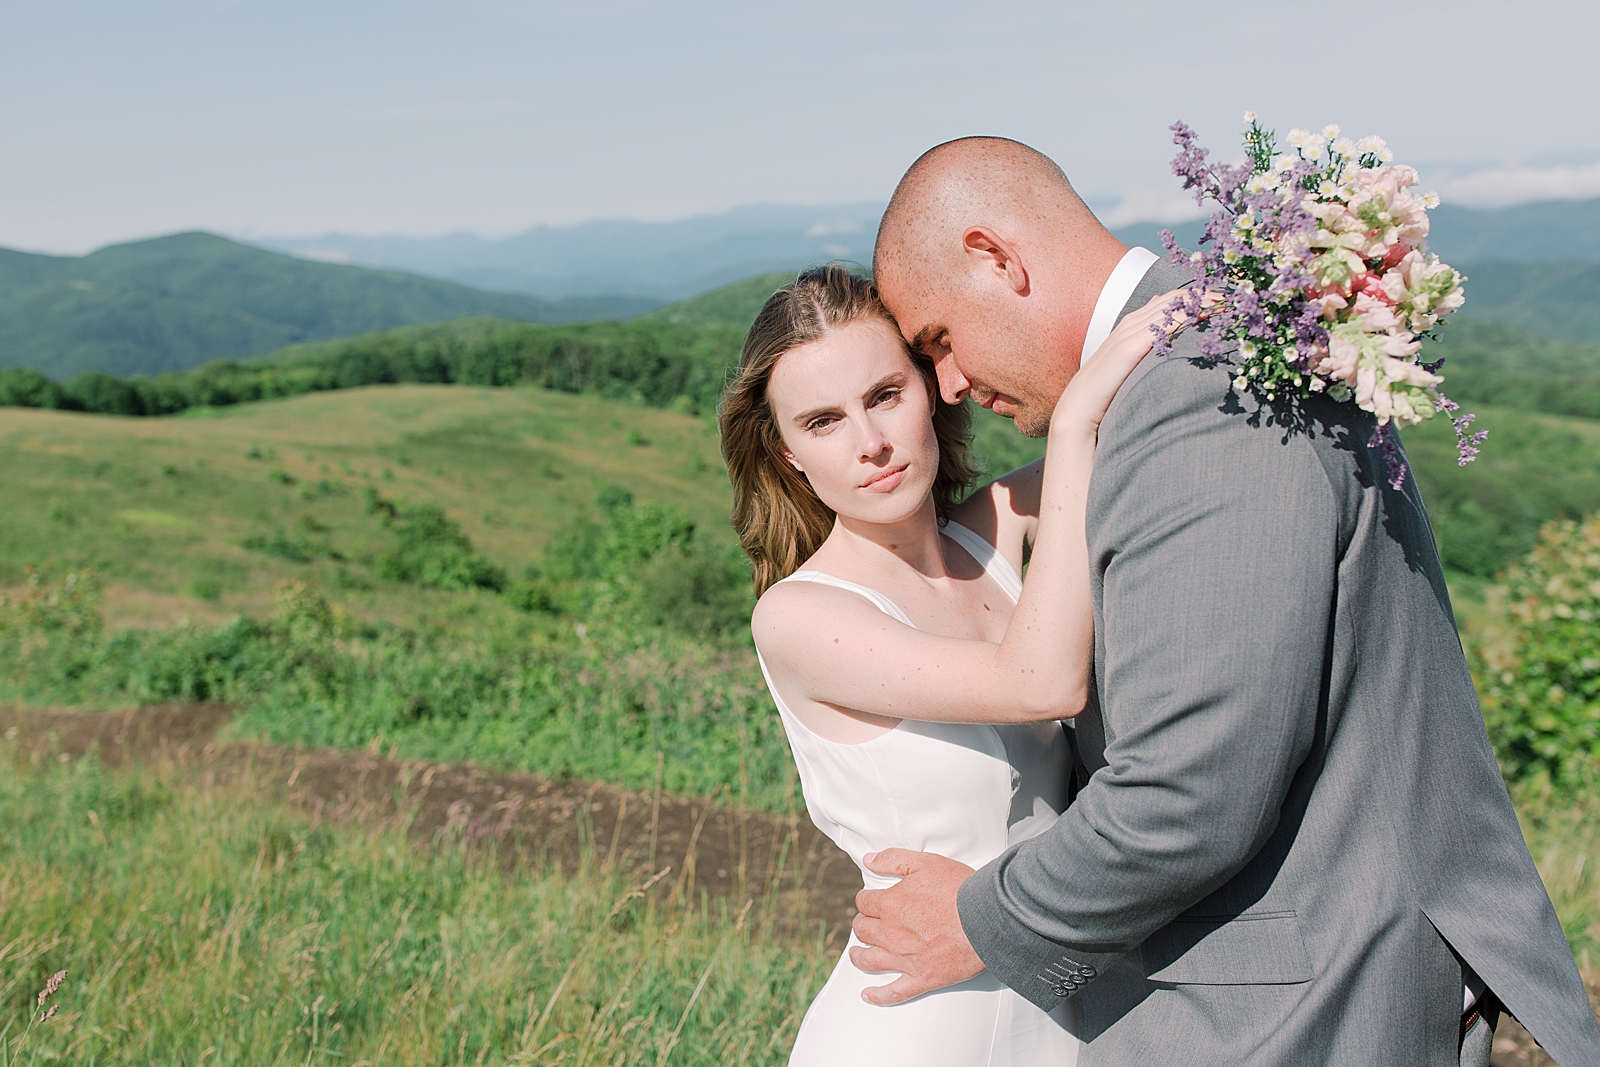 Max Patch Elopement Bride Looking at The Camera While Groom Nuzzles In Photo